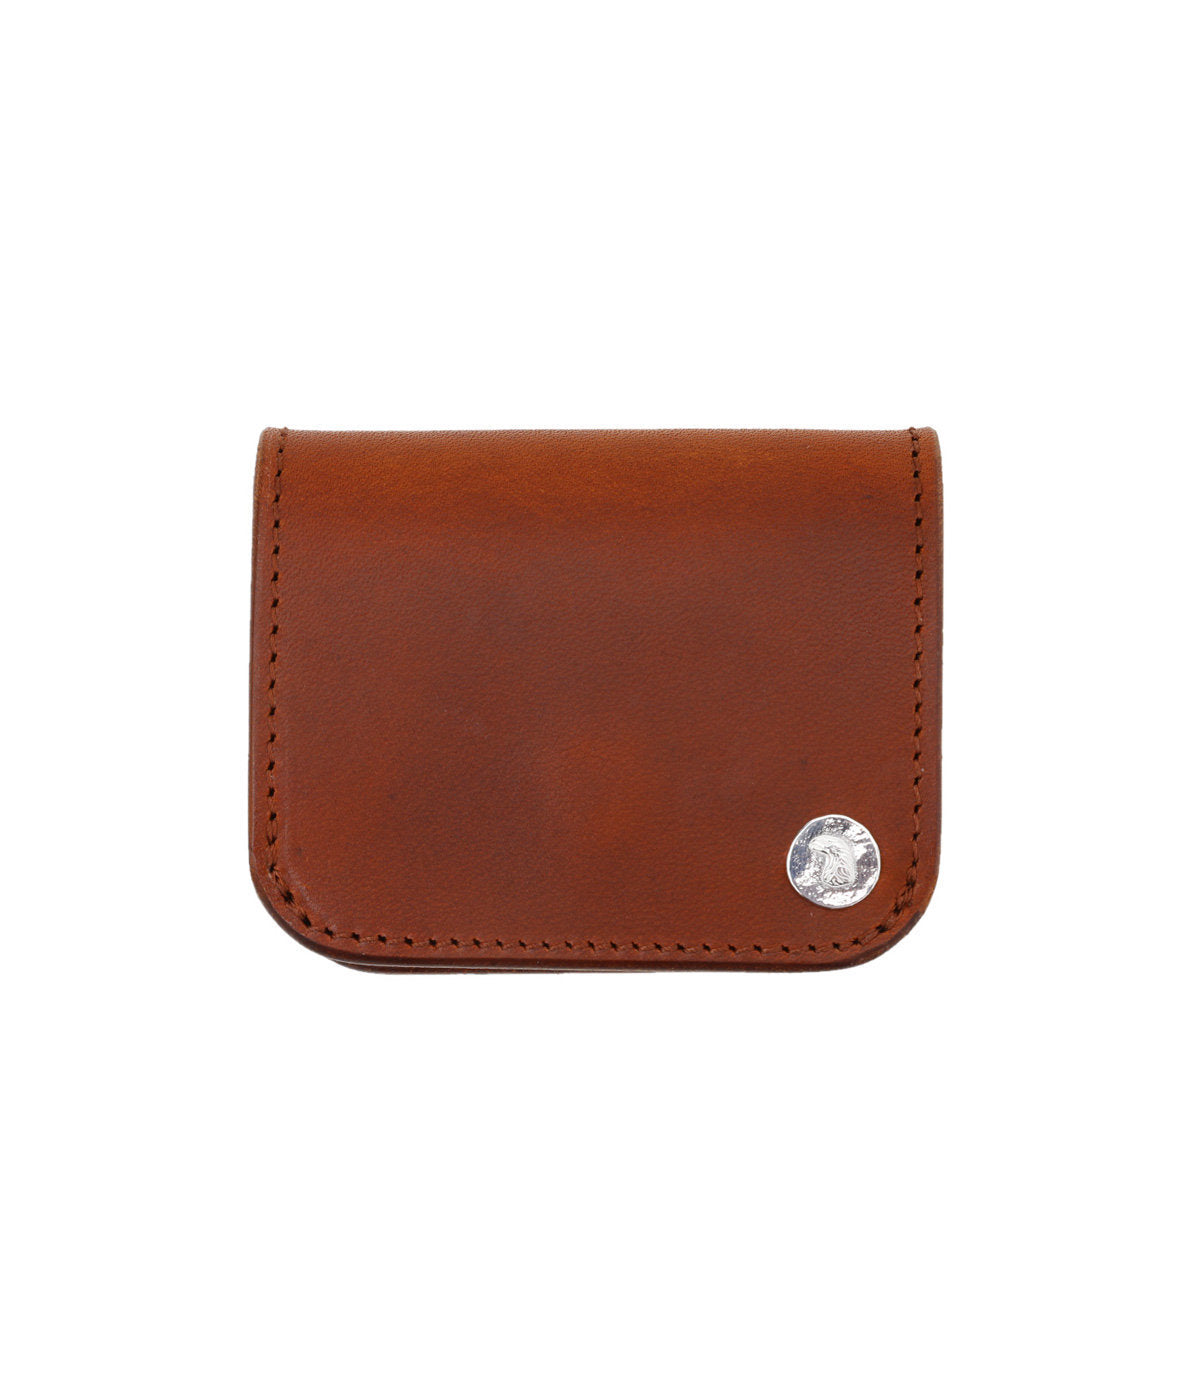 LARRY SMITH COIN CASE No. 2 (TUQ SHELL)